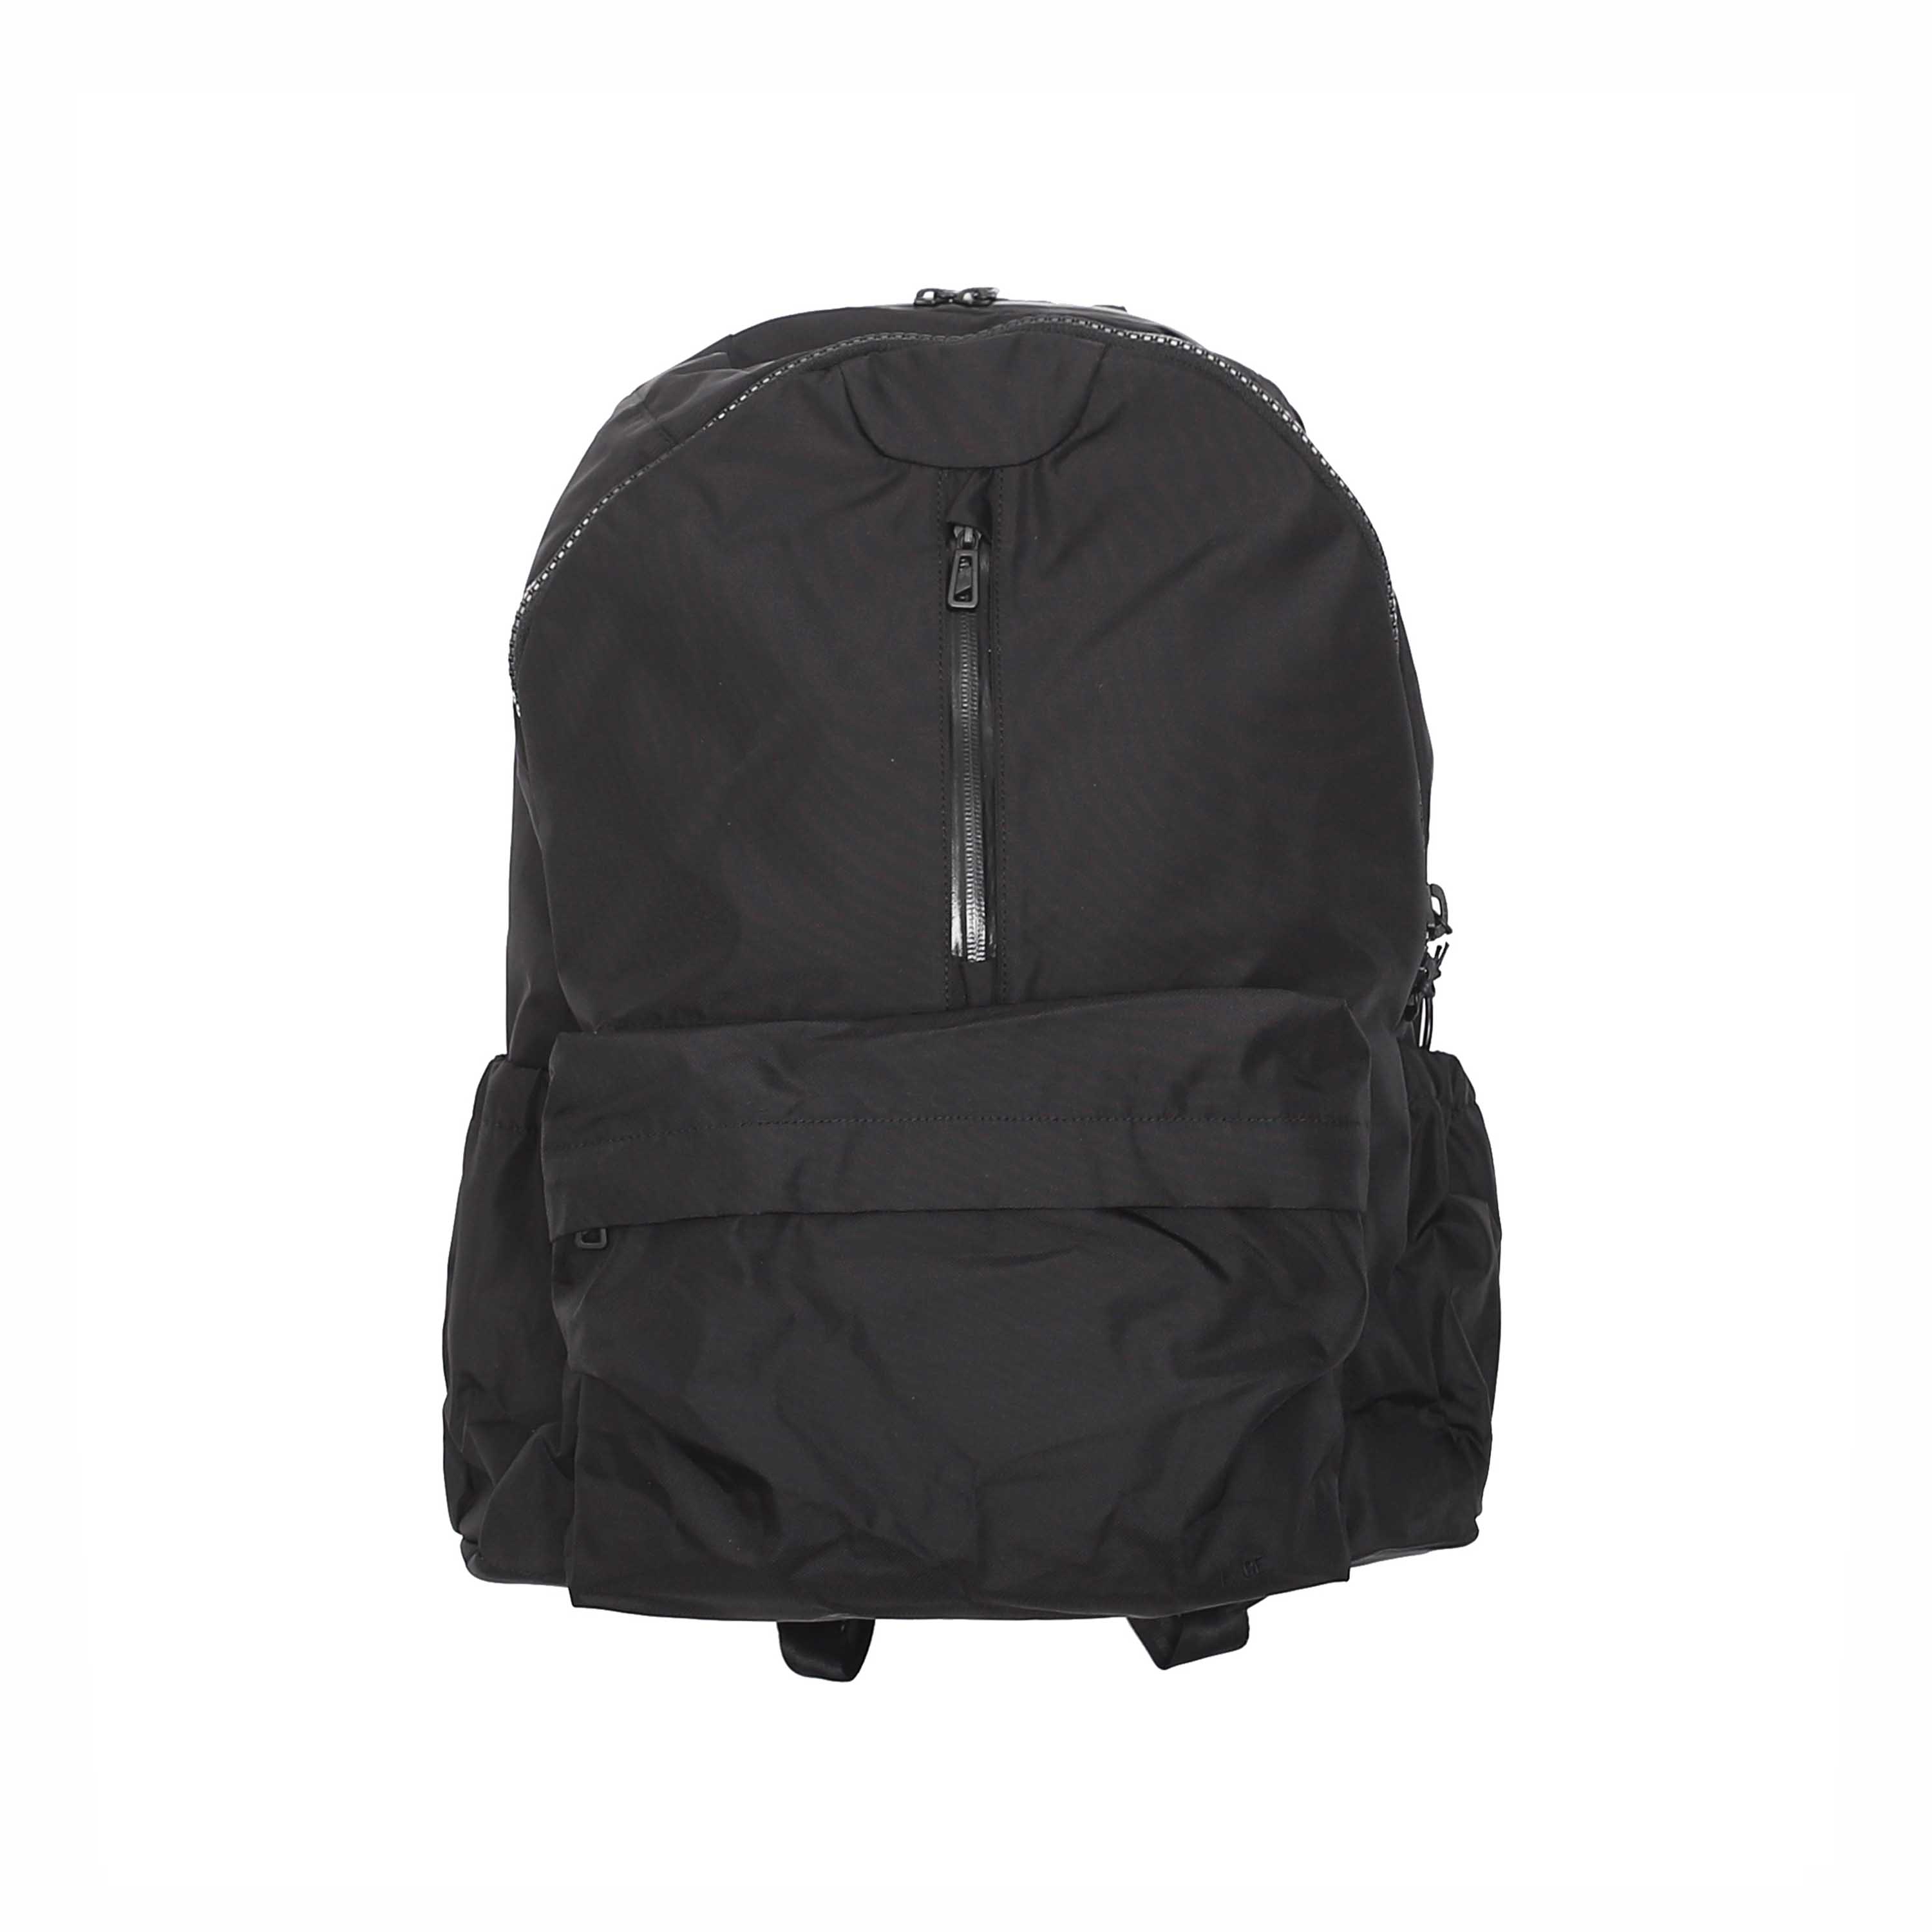 TECHNICAL DAY PACK - BLACK